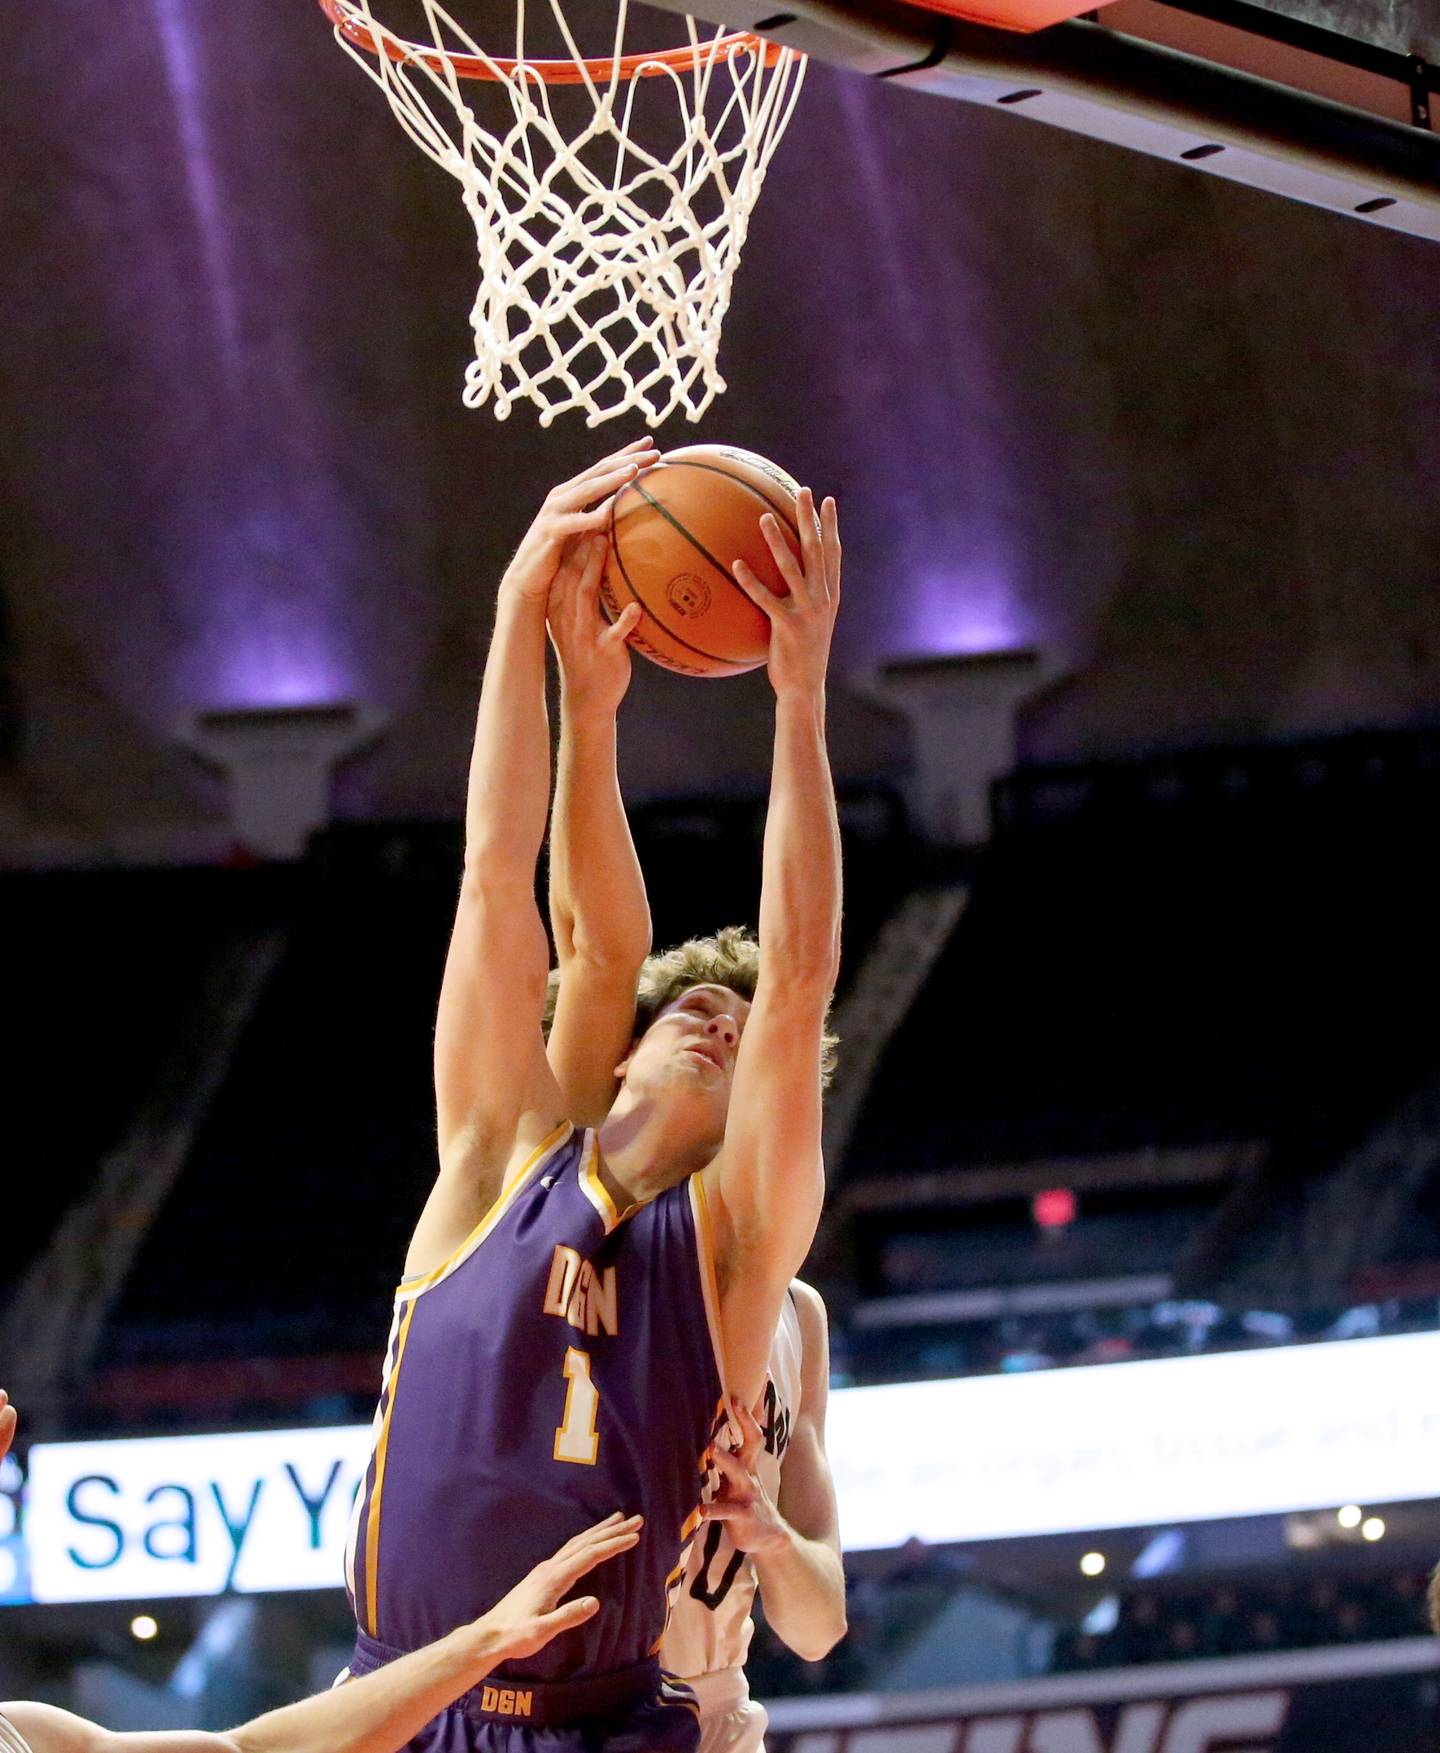 Downers Grove North's Jake Riemer grabs a rebound over New Trier's Tyler Van Gorp in the Class 4A state third place game on Friday, March 10, 2023 at the State Farm Center in Champaign.